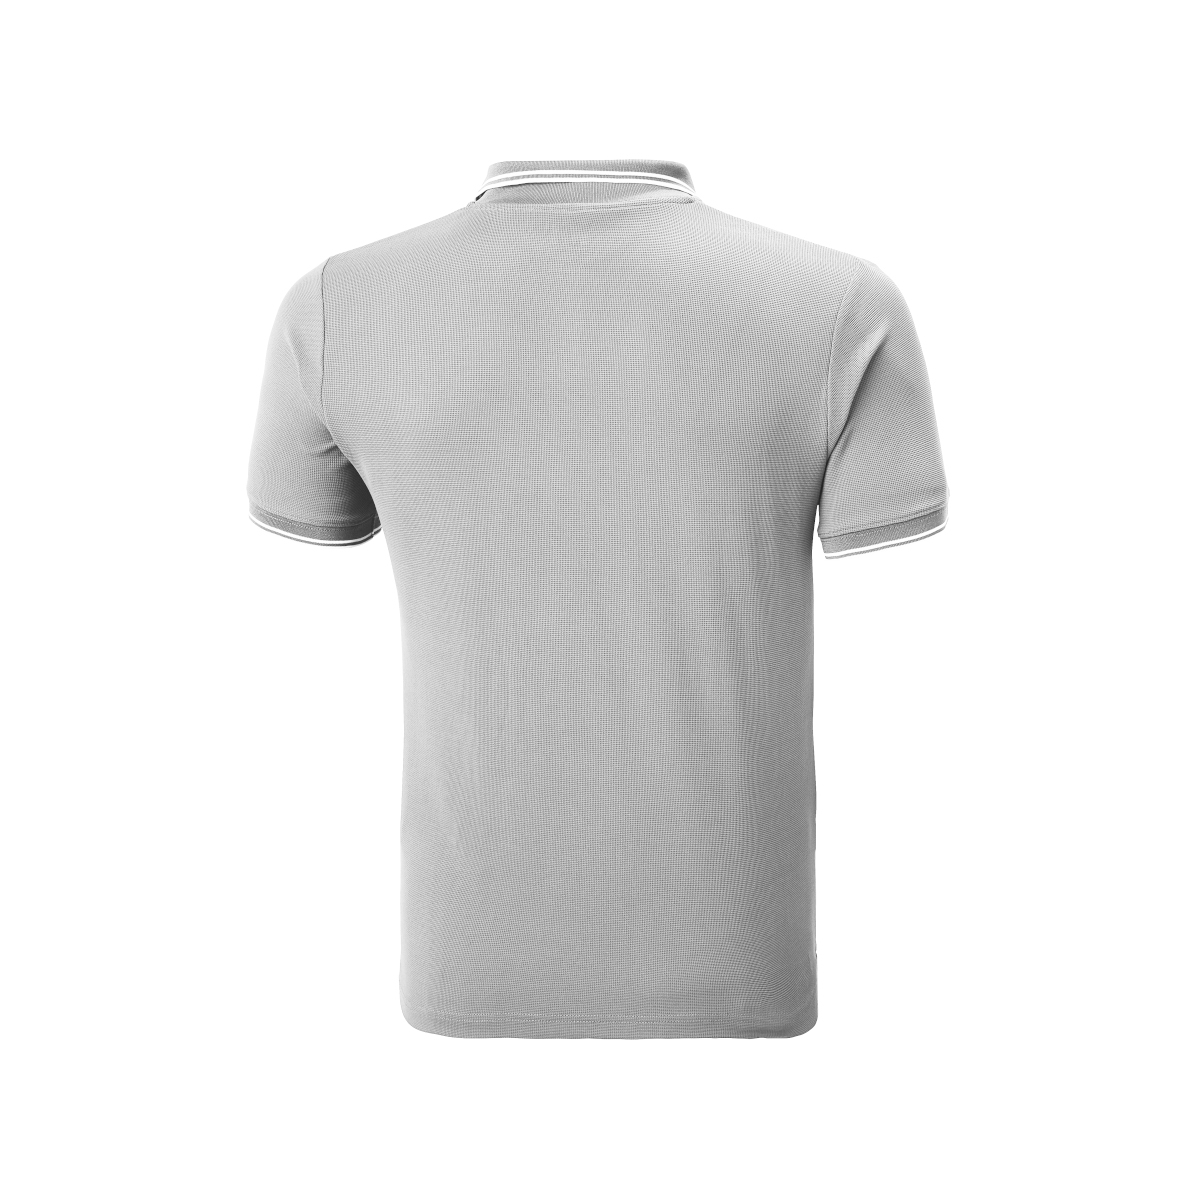 Helly Hansen KOS polo homme gris, taille L